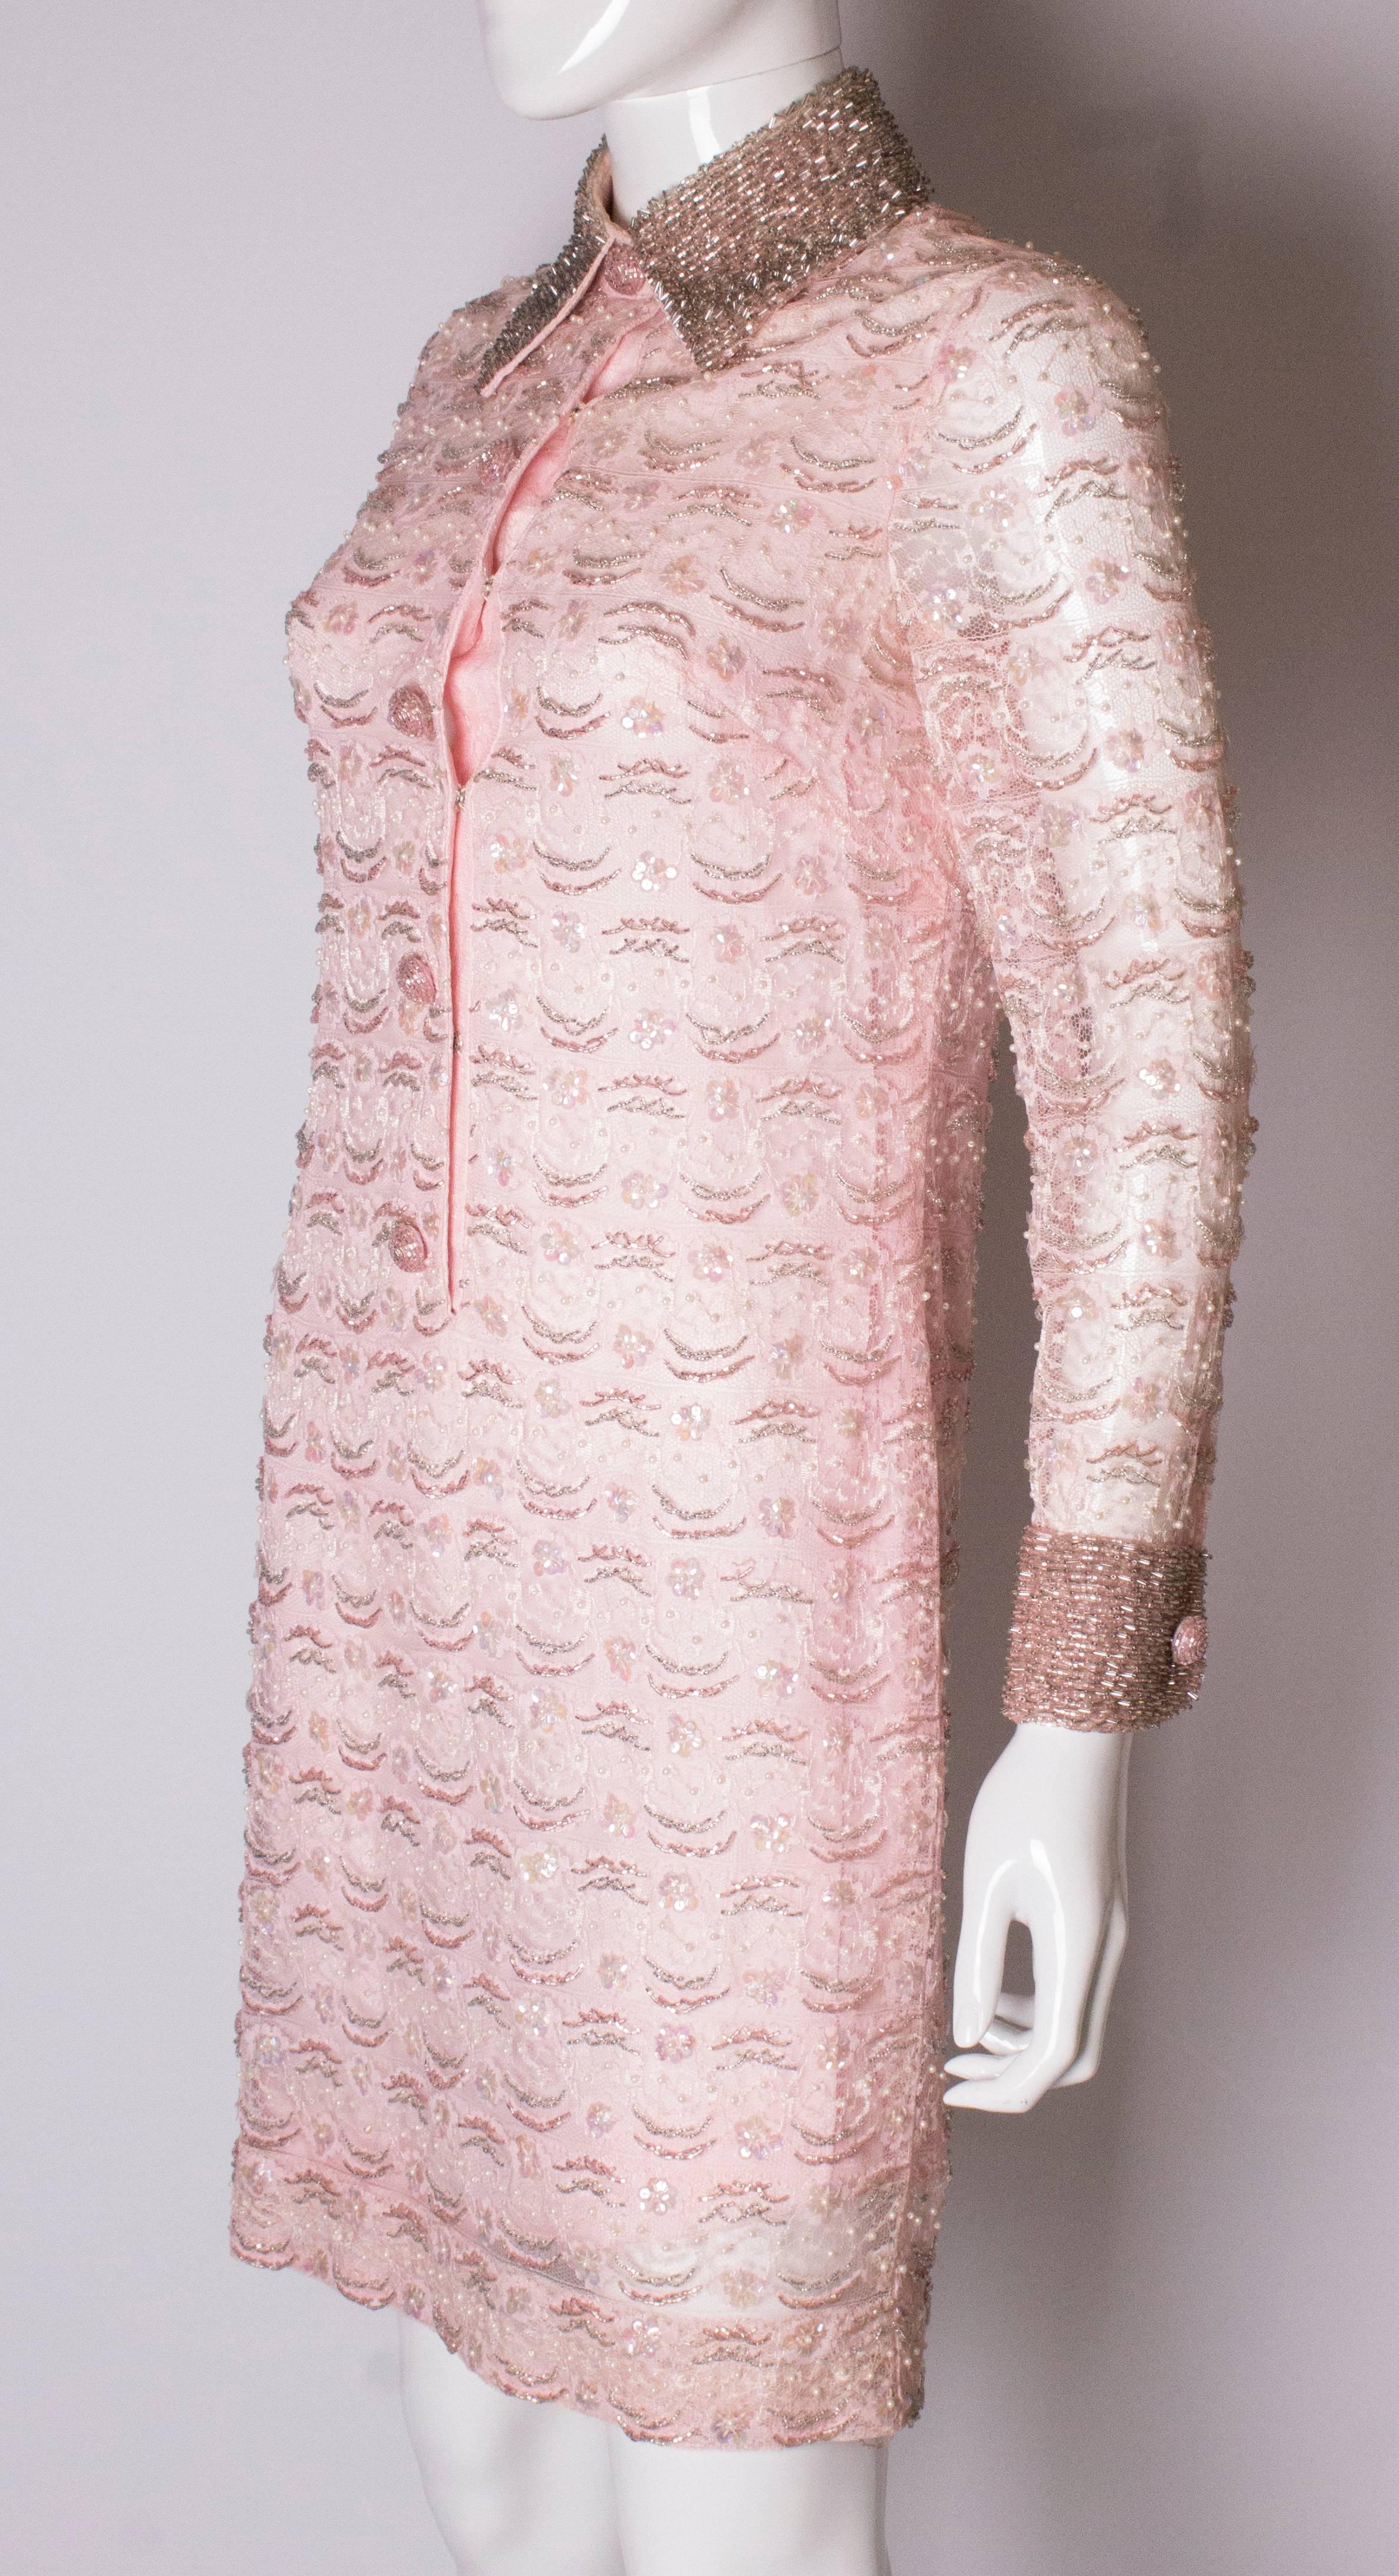 Women's Pink Lace and Bead Vintage Shirtdress